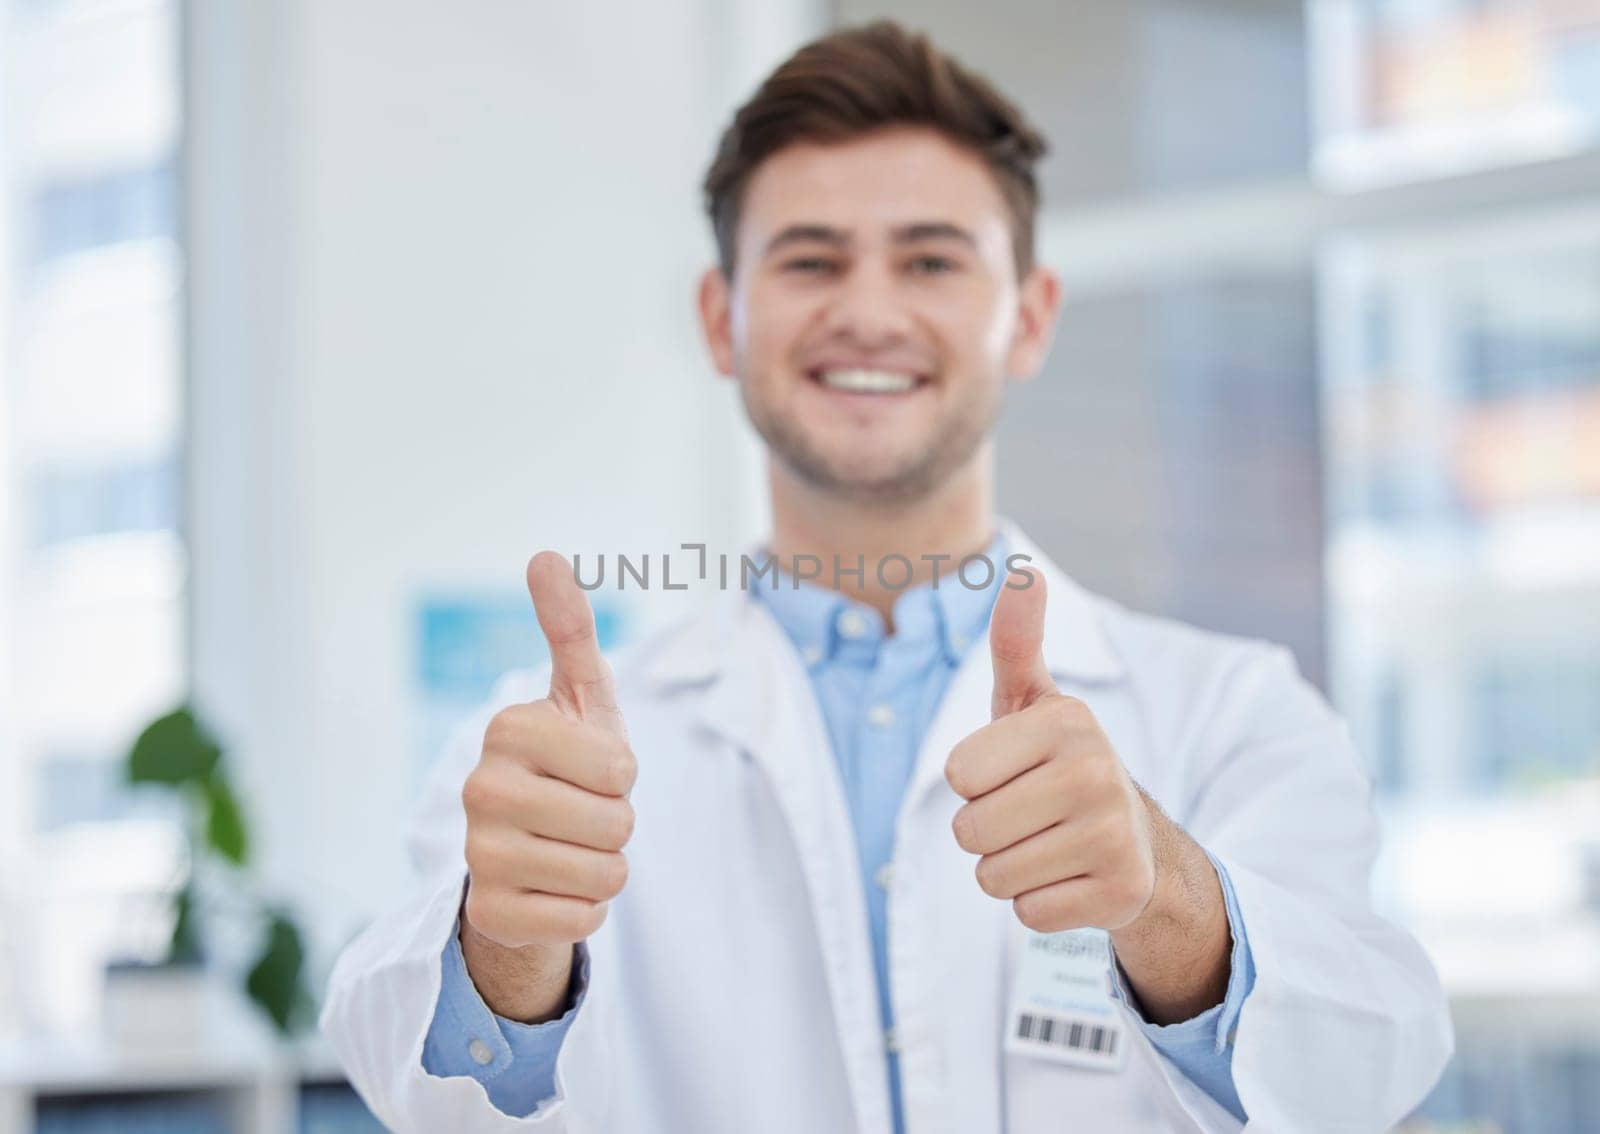 Medical, thumbs up and portrait of happy doctor with hand gesture or sign excited for good news in a clinic. Young, medicine and man healthcare professional in agreement, thank you and satisfied.